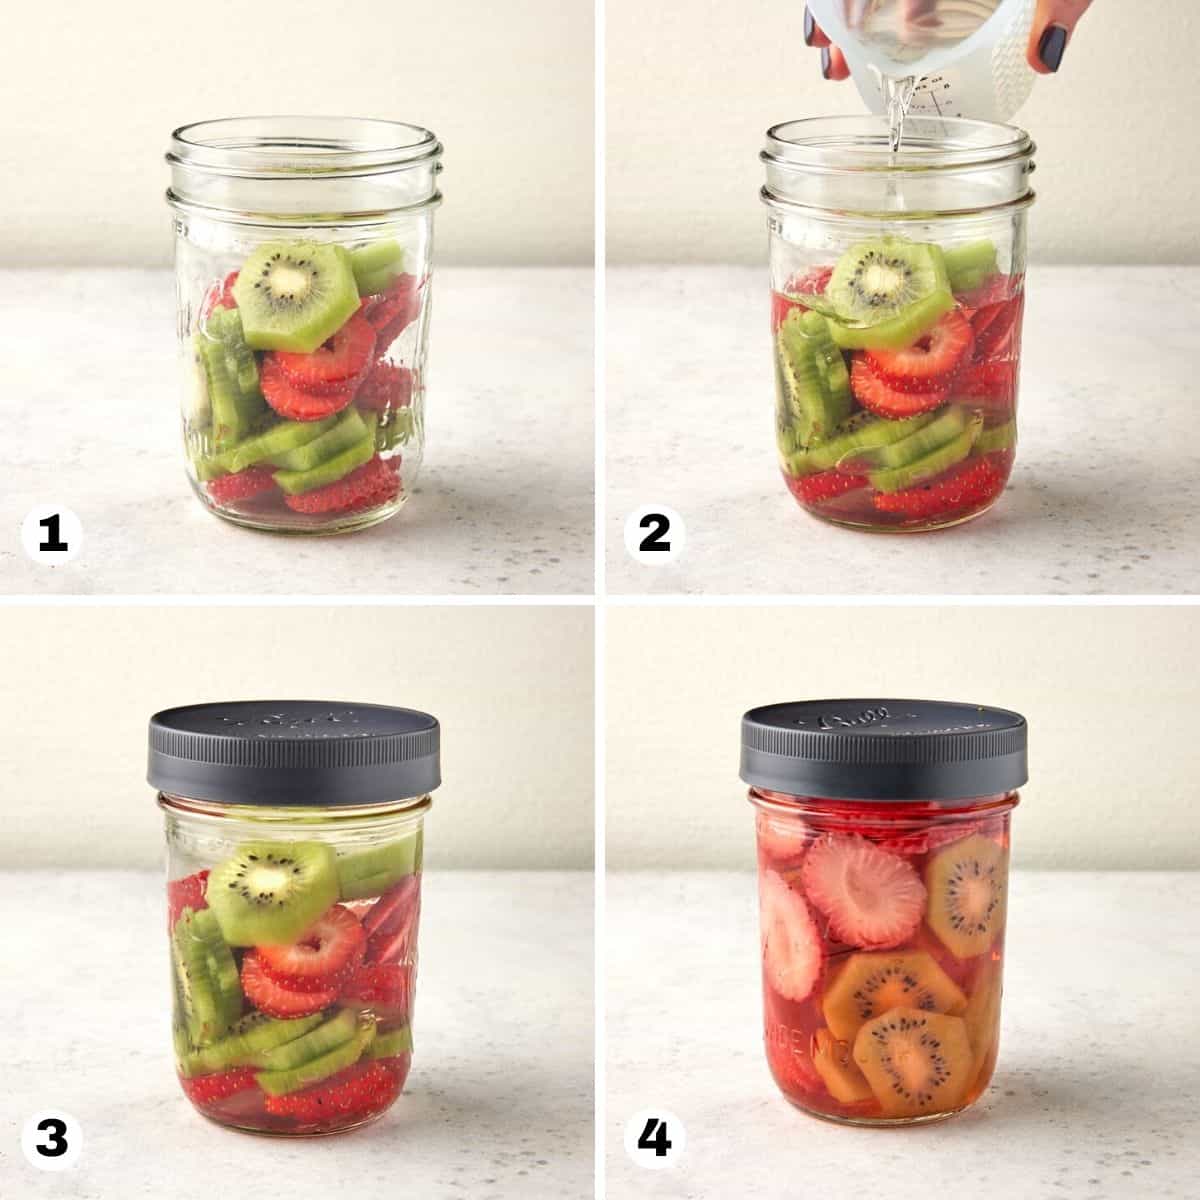 Hand pouring rum into mason jar filled with kiwi and strawberry slices. 